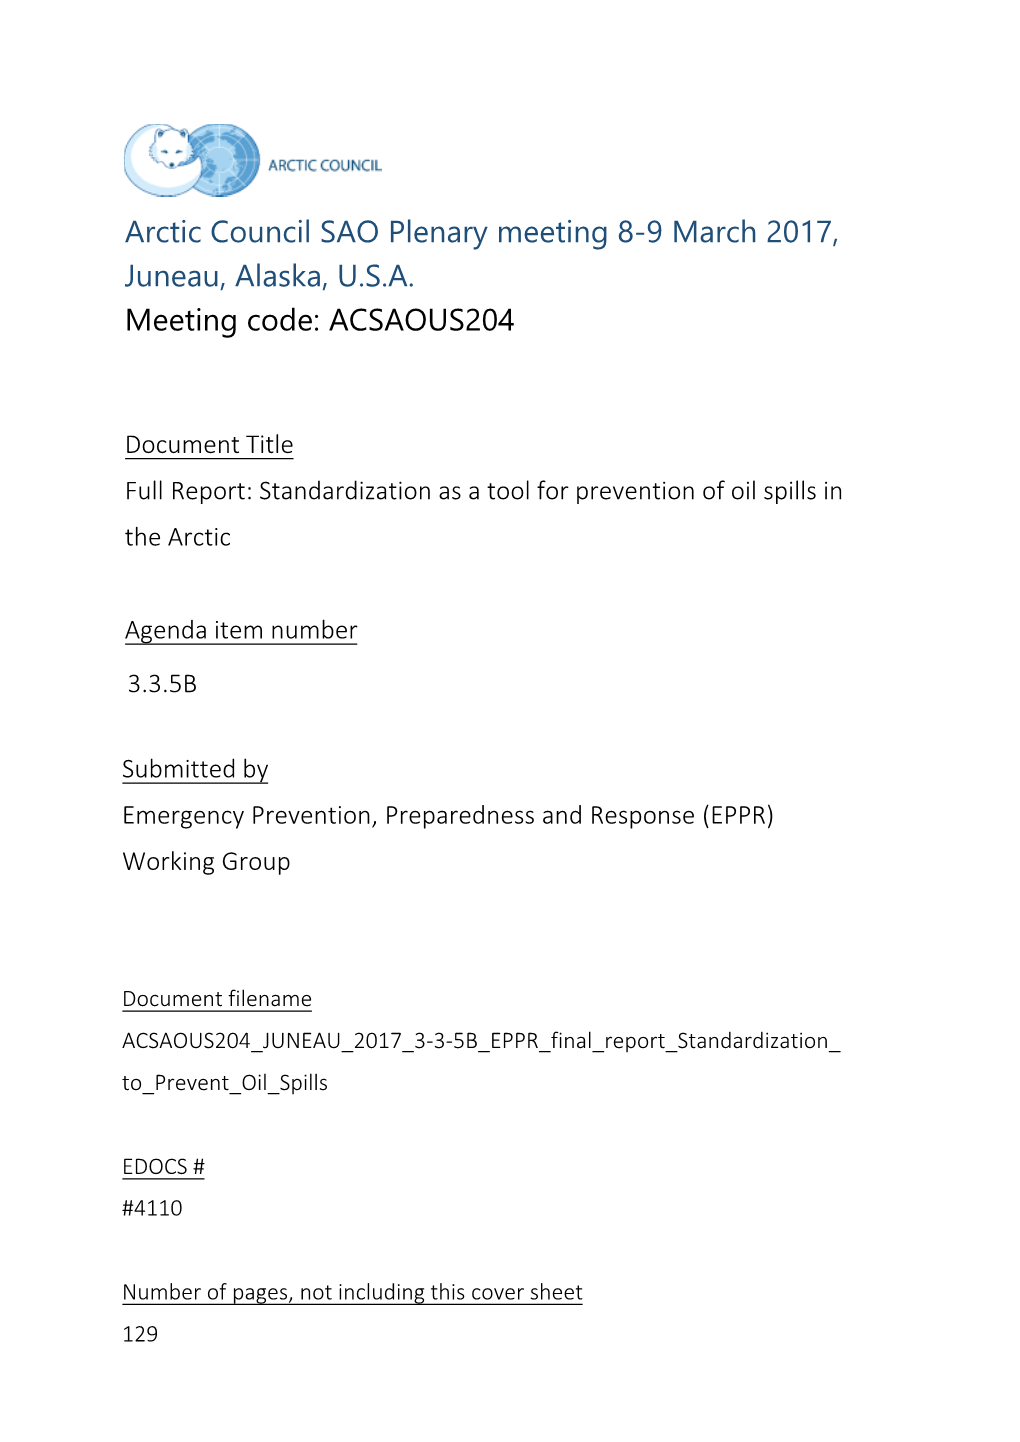 Standards for the Prevention of Oil Pollution in the Arctic